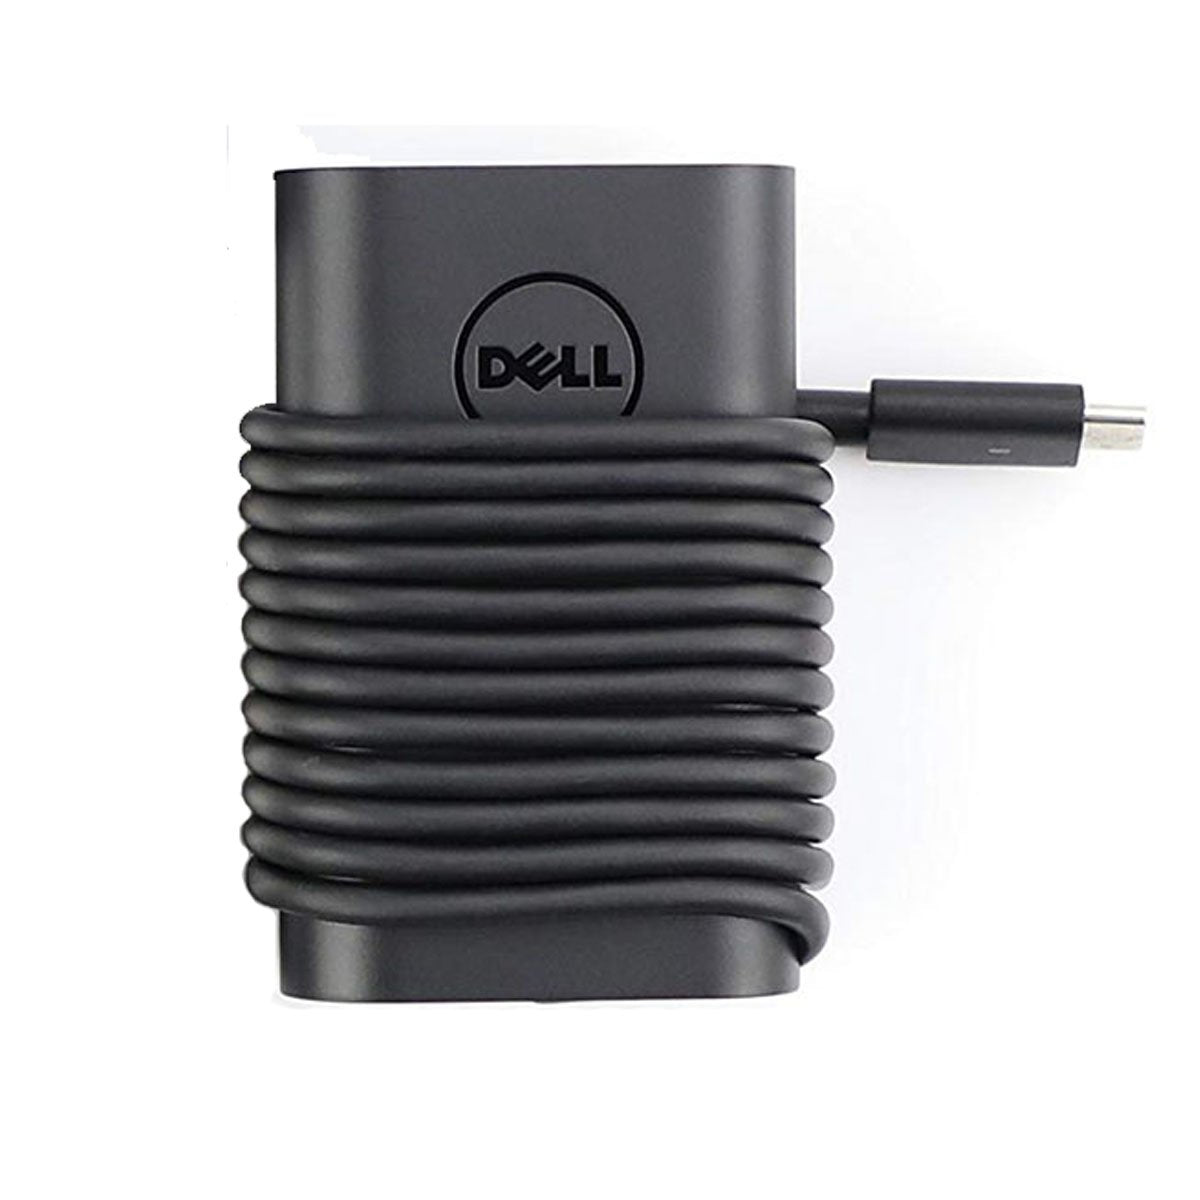 Dell Original 45W 20V USB Type C Laptop Charger Adapter for XPS 12 9250 With Power Cord